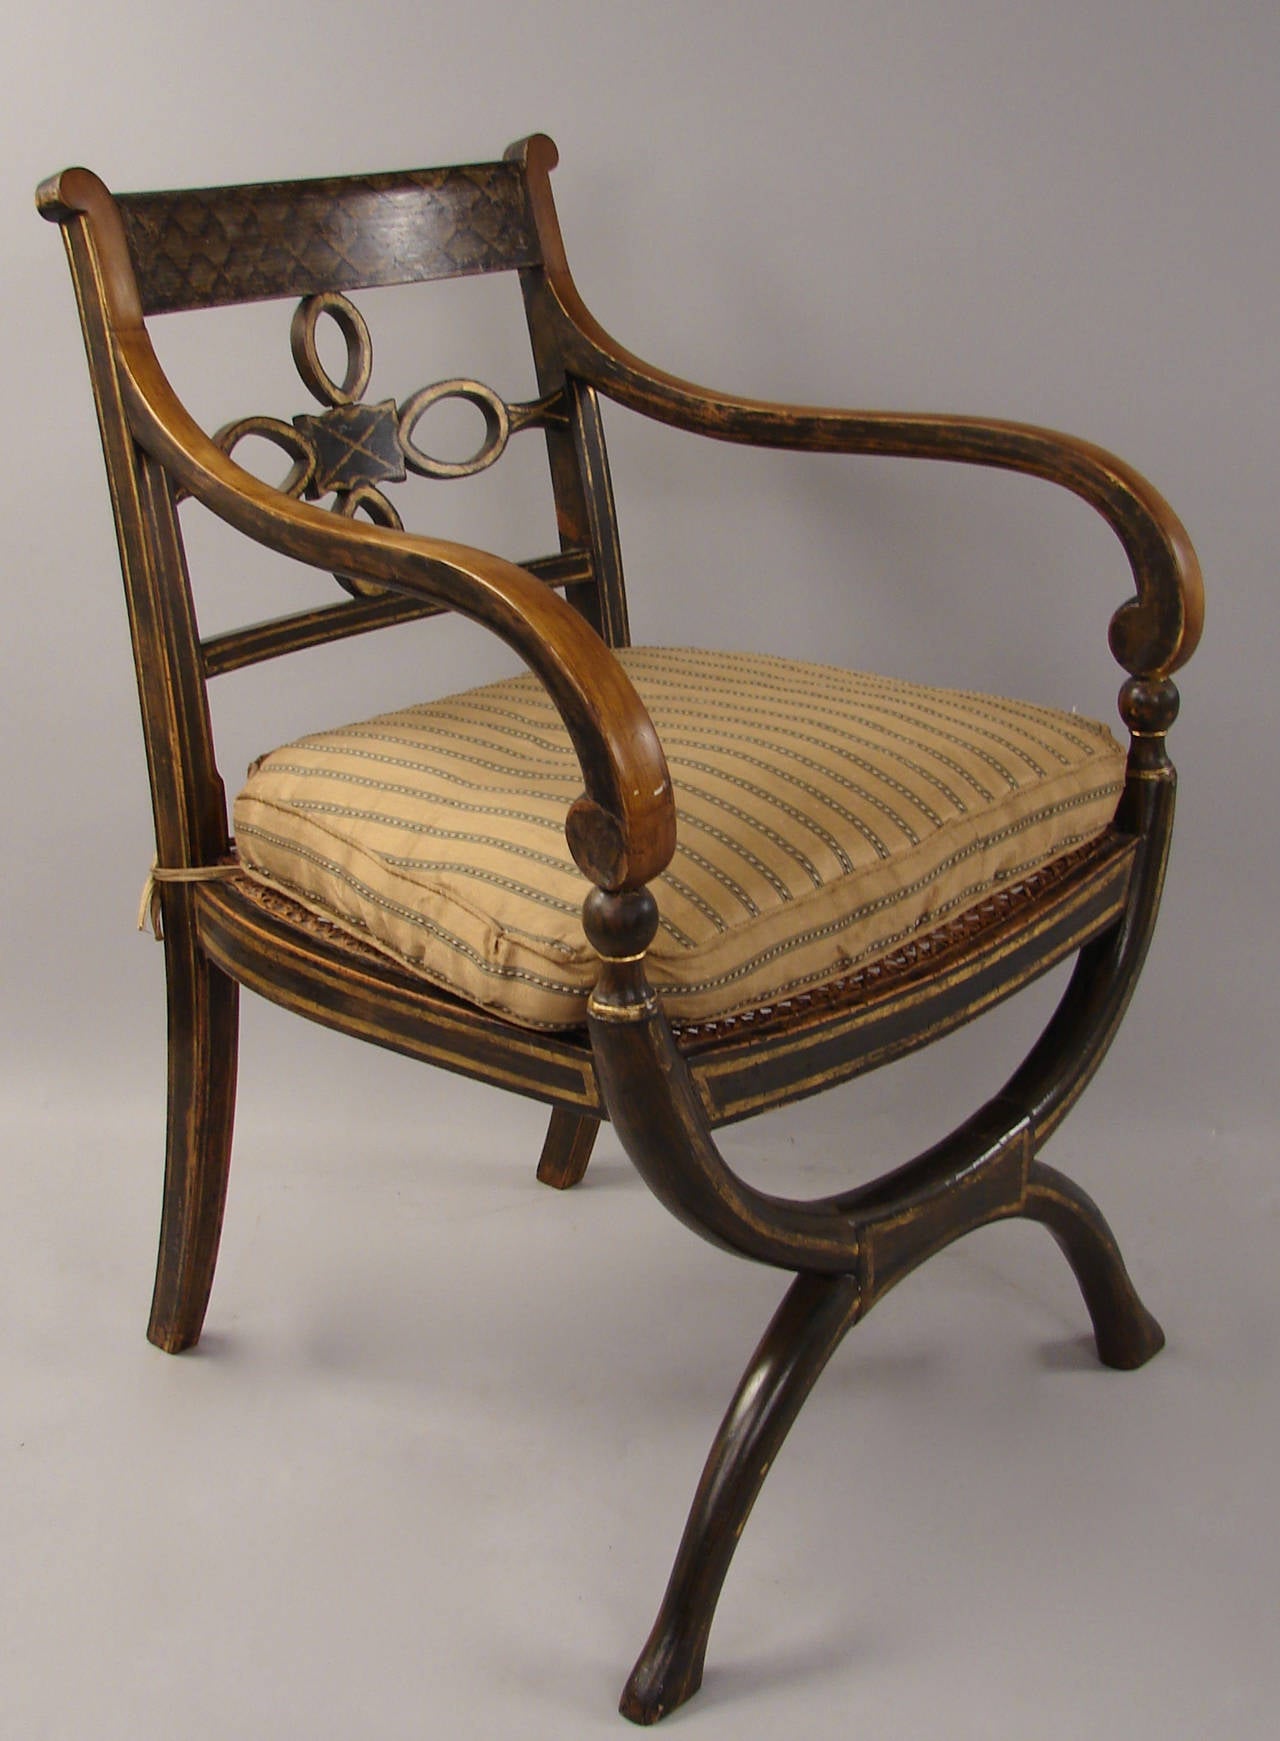 A painted and parcel-gilt Regency armchair of Curule form, circa 1820.